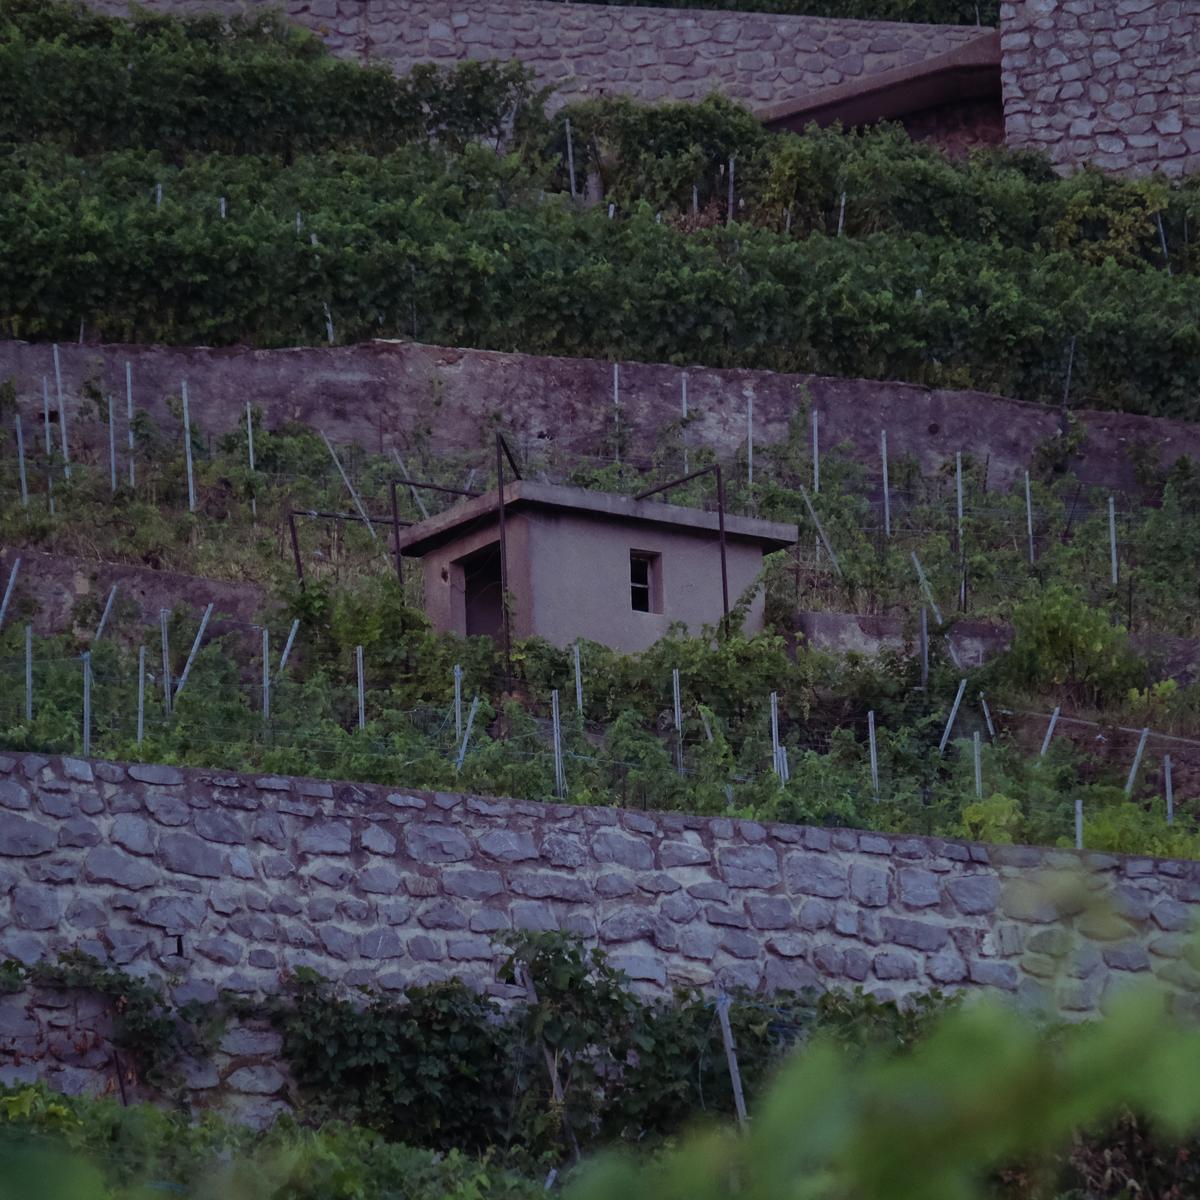 A concrete shack in a vineyard on the shore of Lac Léman, Switzerland where I spent the night